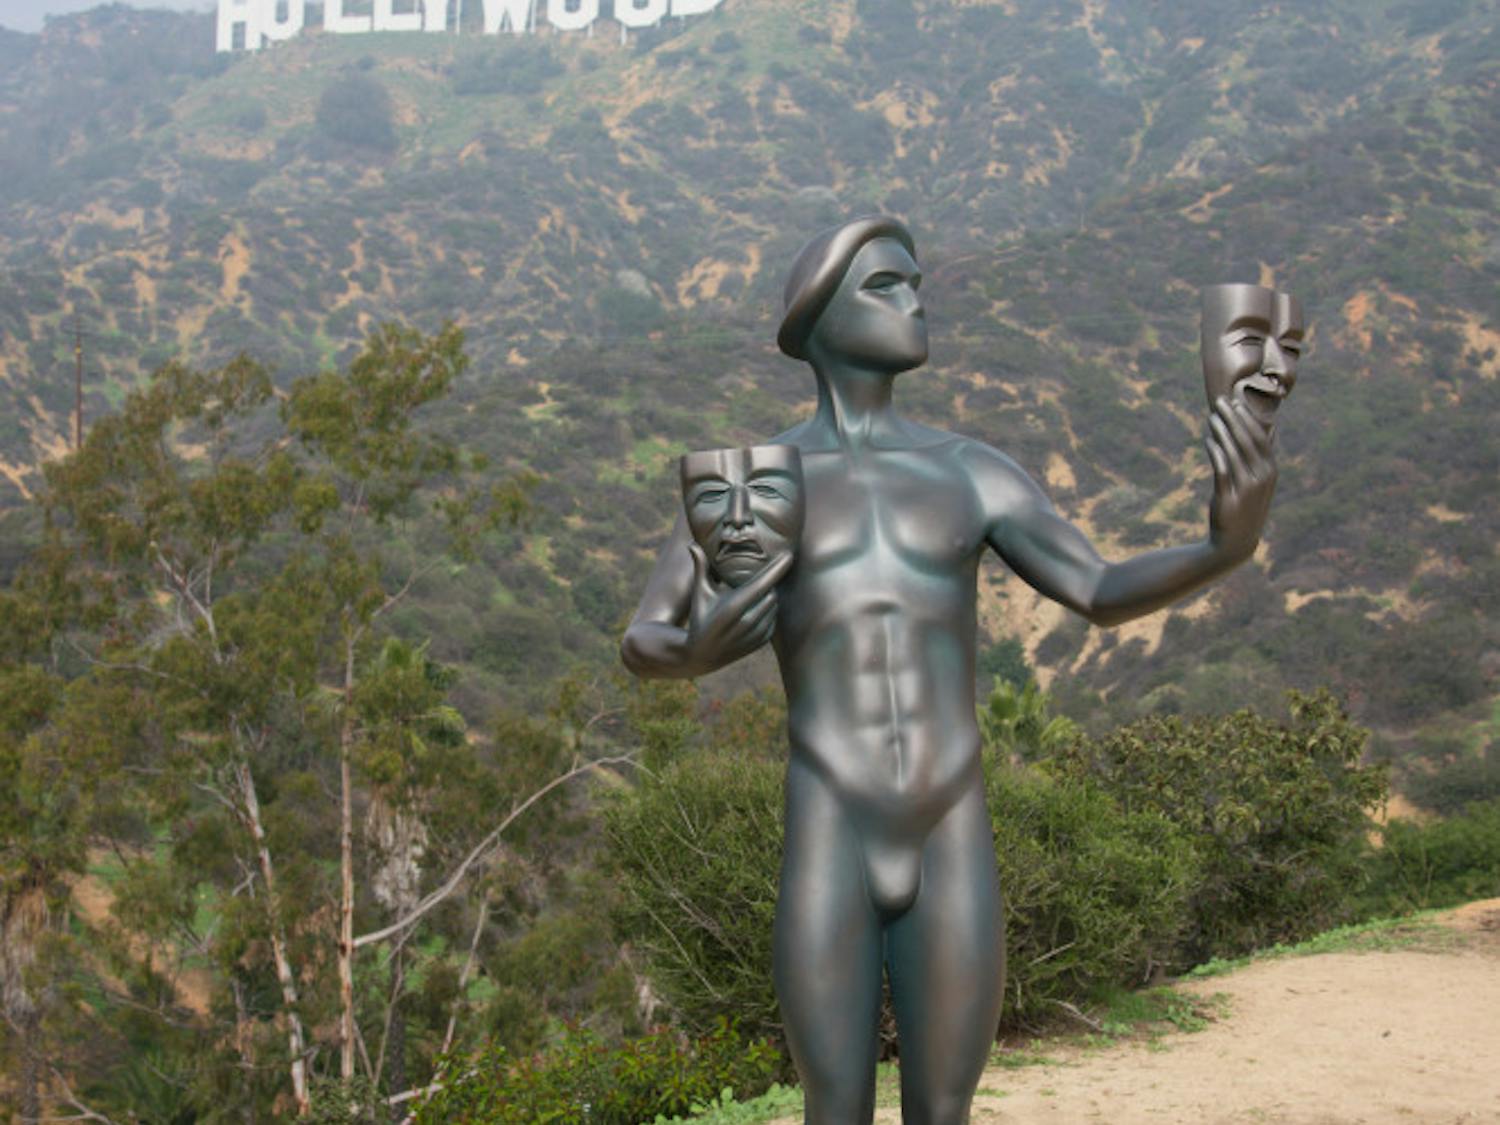 The Screen Actors Guild Awards actor statuette appears near the Hollywood Sign on Tuesday, Jan 20, 2015, in Los Angeles. The SAG awards will be presented on Jan. 25. (Photo by Rob Latour/Invision/AP)